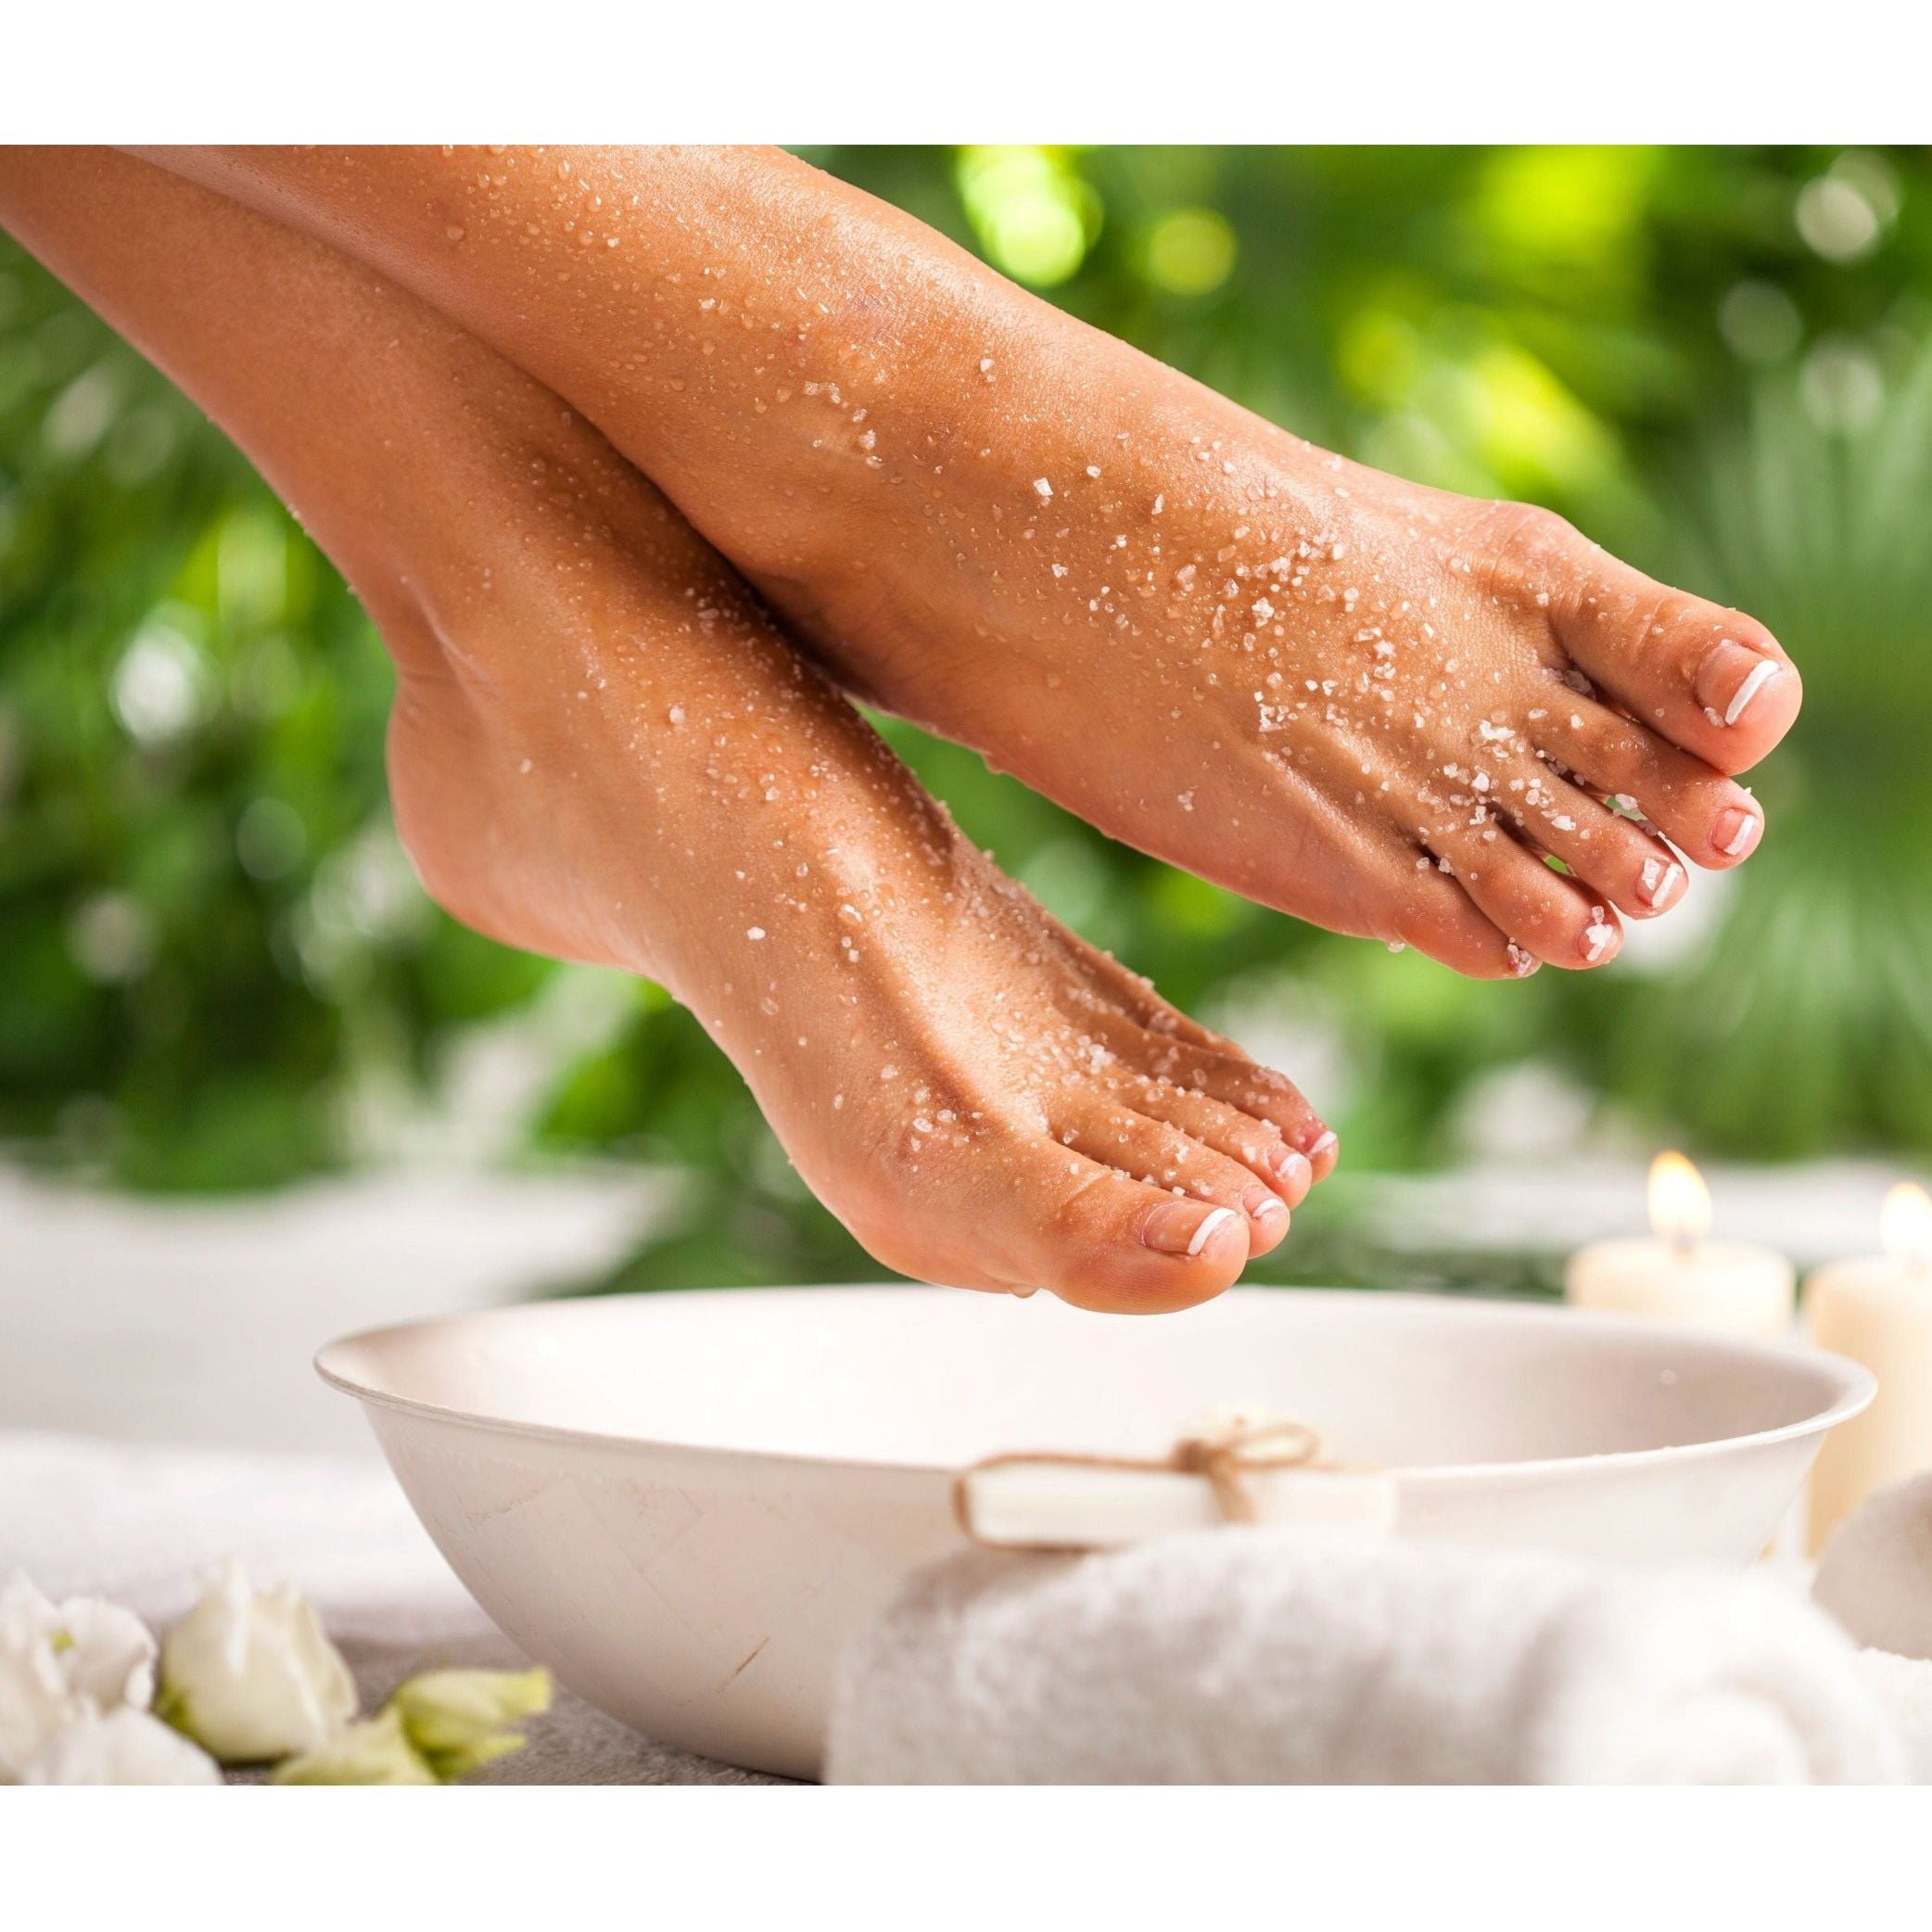 Exfoliating Sugar Scrub on Feet - Lavender Patchouli Scent by Roots and Bloom Skin Care